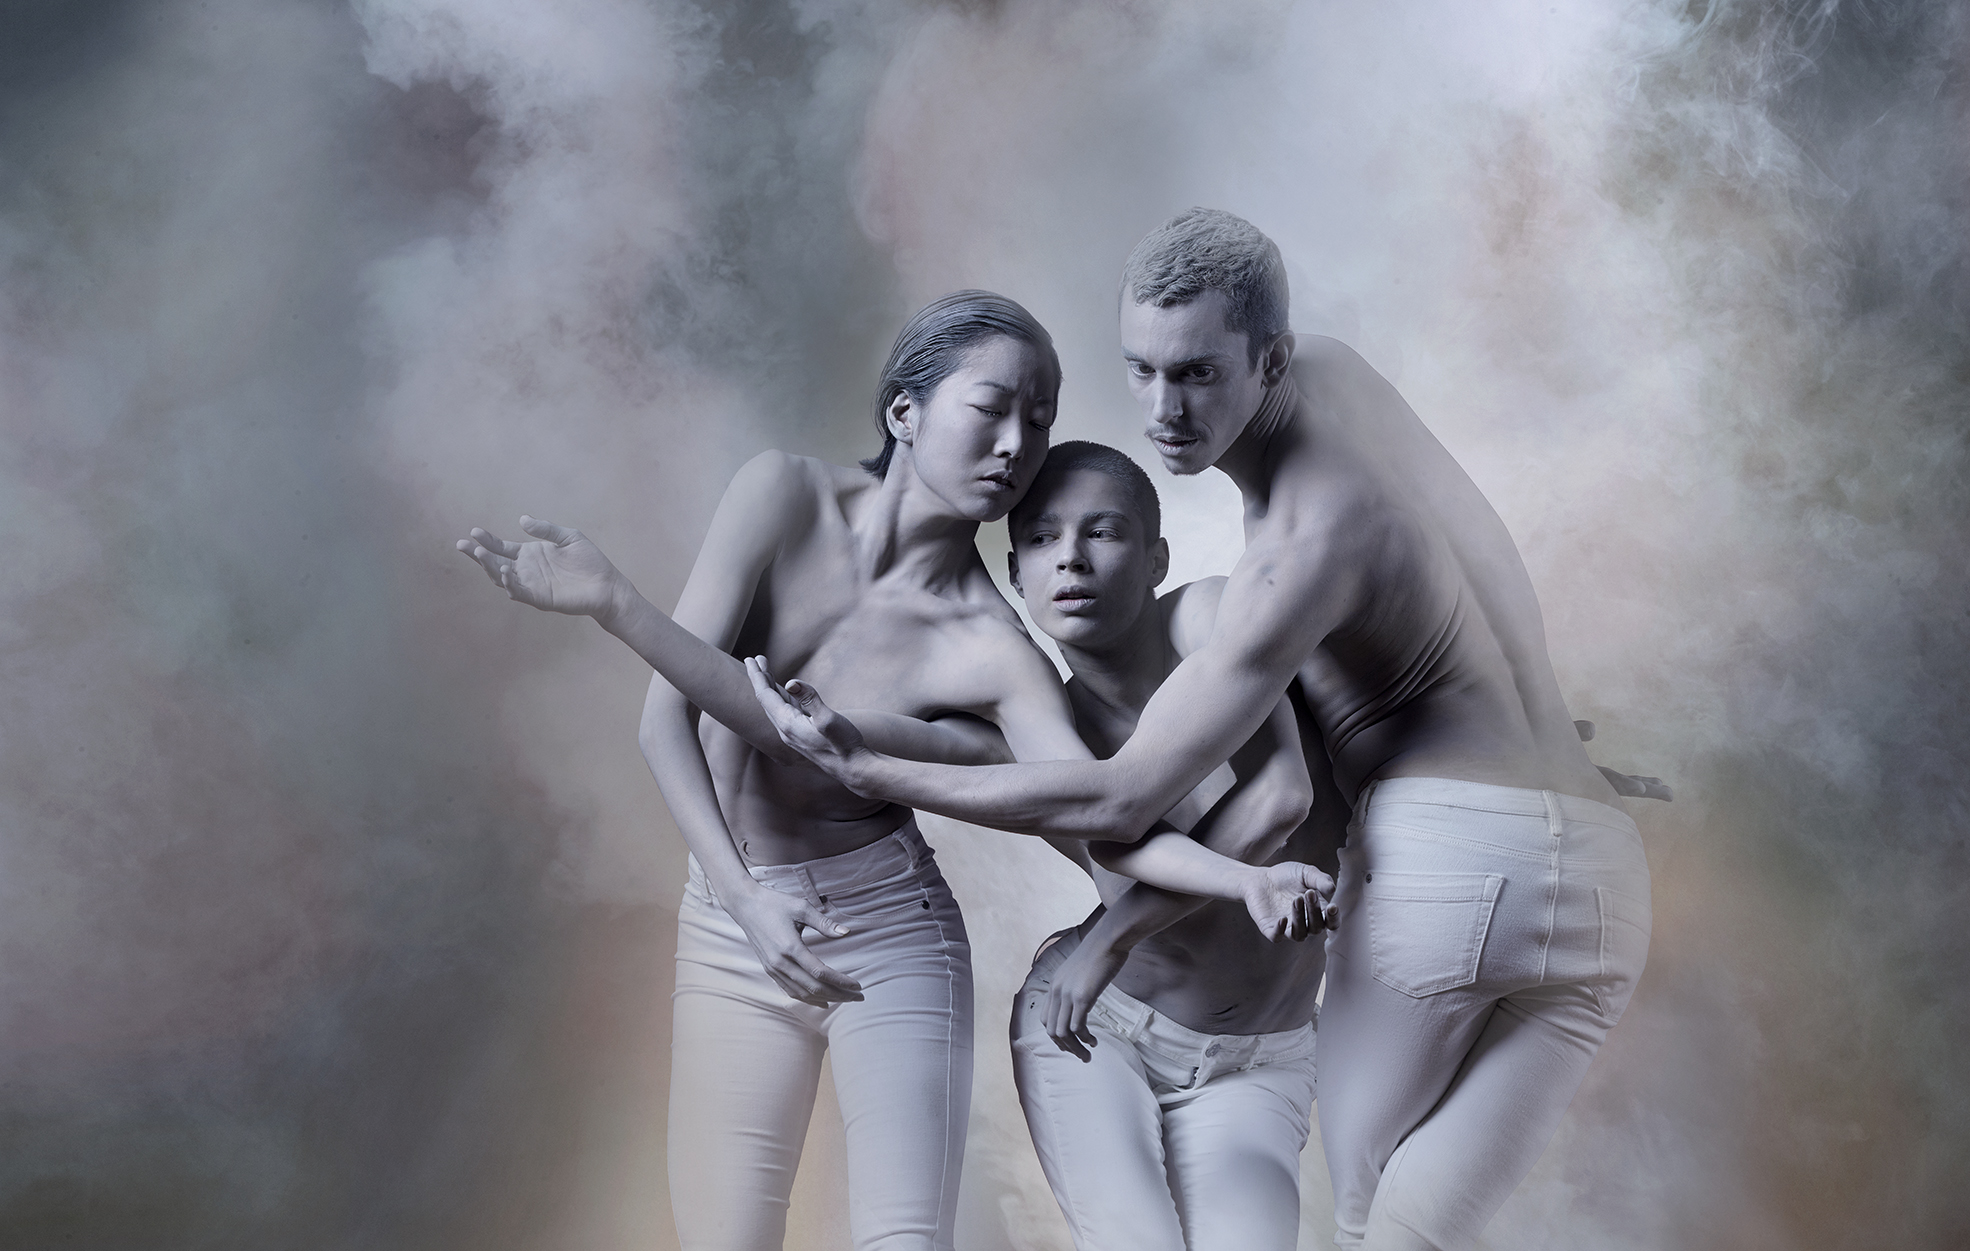 Three individuals with bare upper bodies engaged in a close embrace in a dance. They are wearing white trousers. The background is filled with a smoky or cloudy texture with various shades of gray.